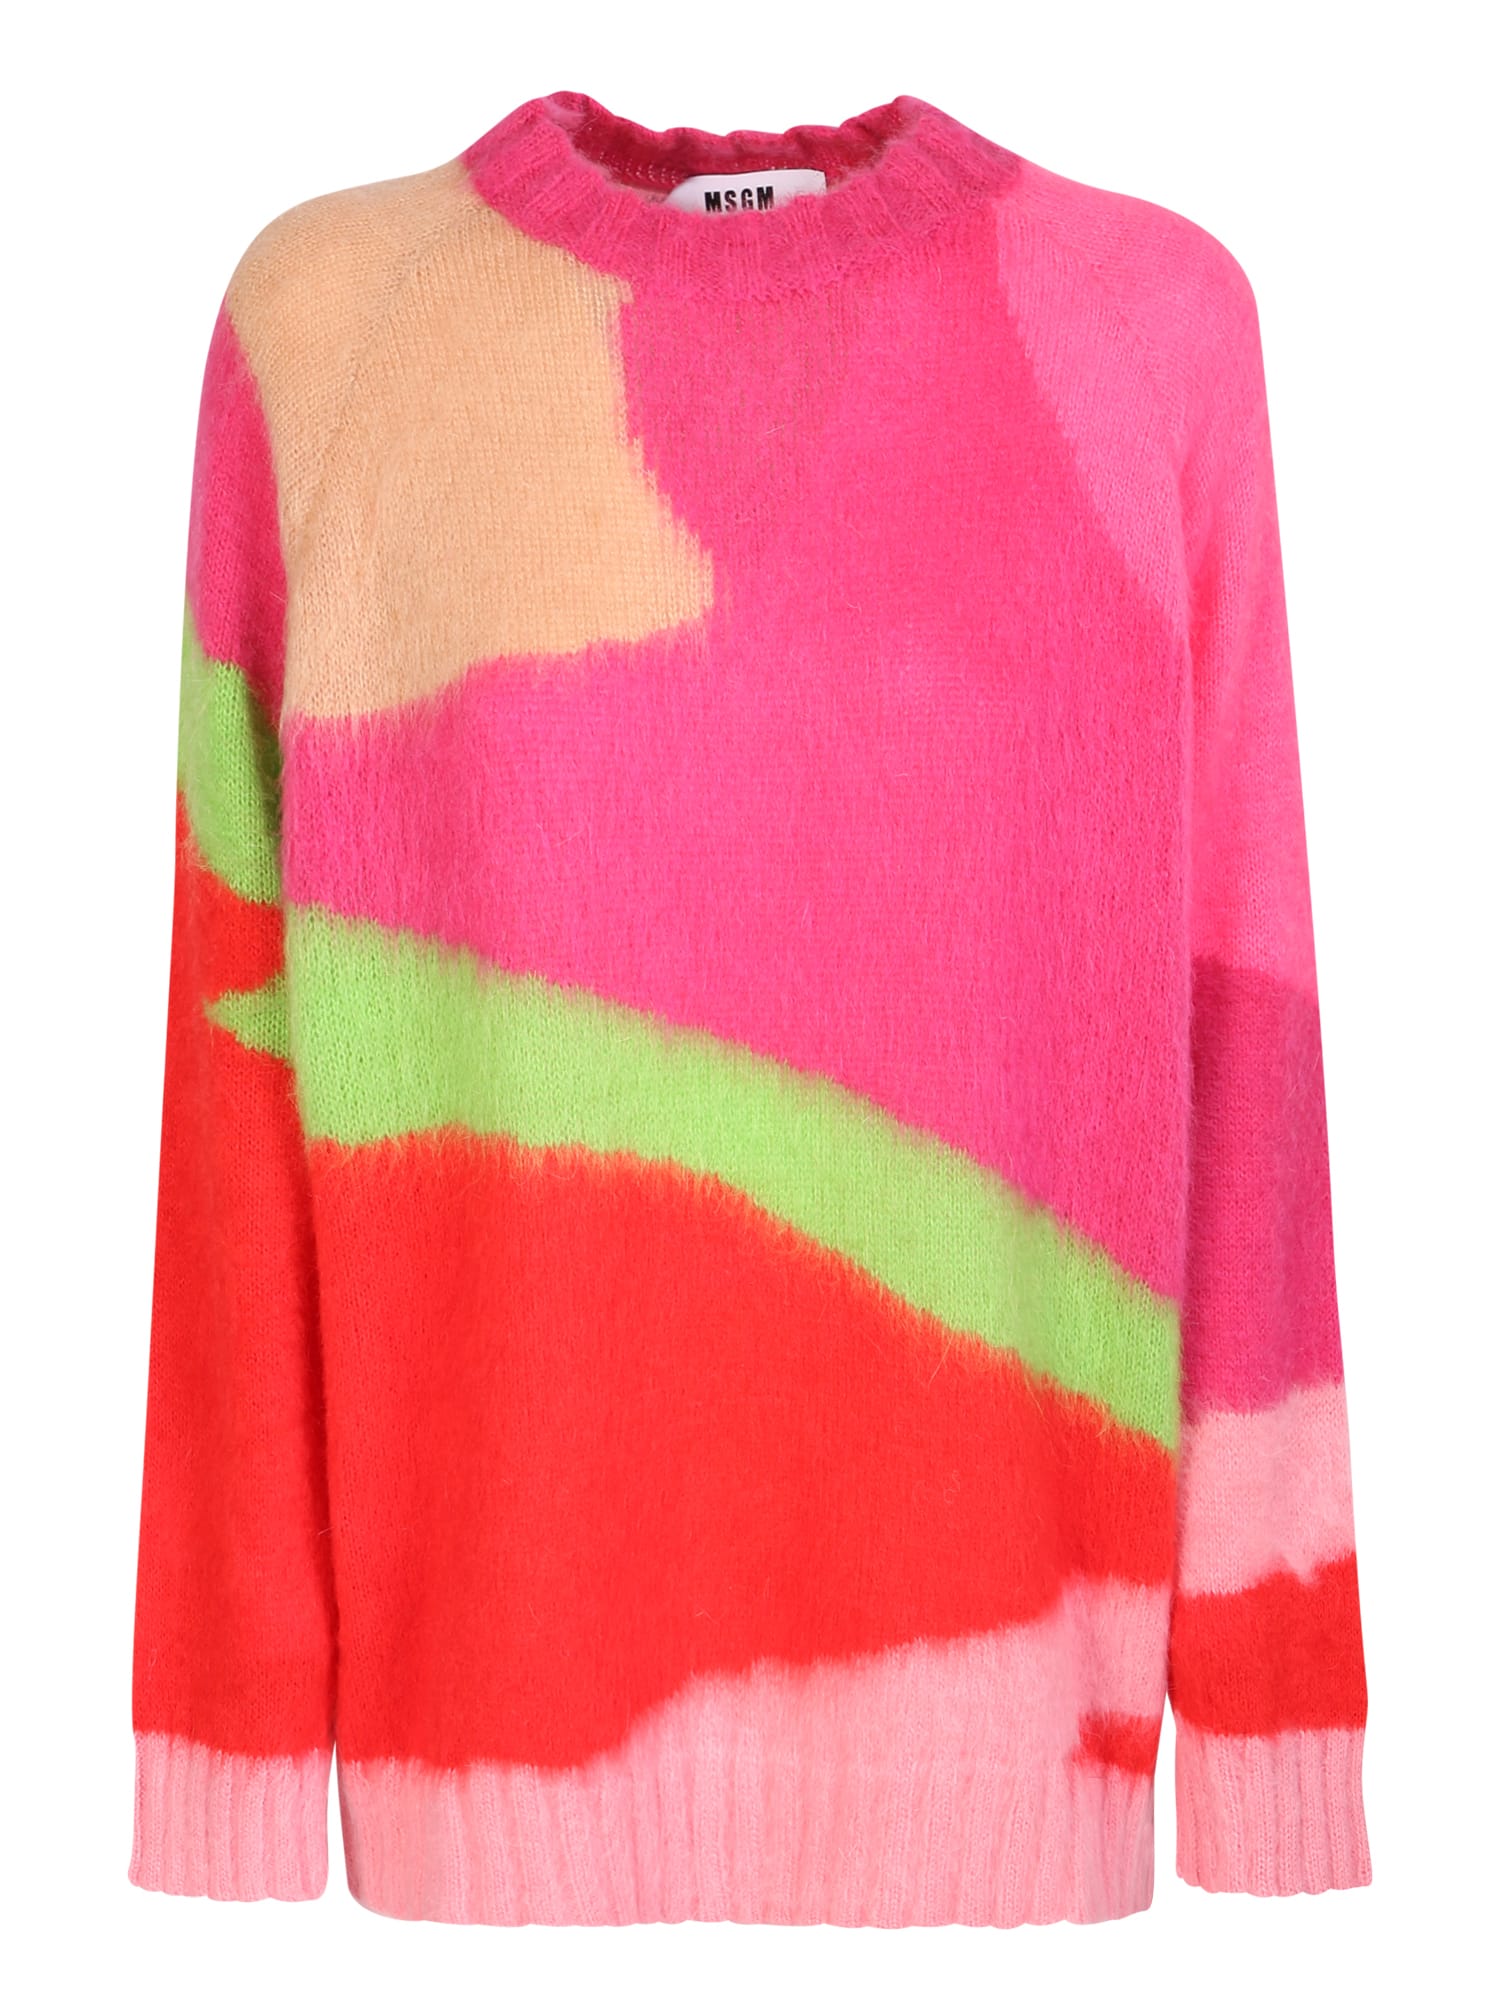 MSGM Multicolored Pullover By. Design Completely Similar To The Brand Identity; Palette Of Bold Colors And Urban Style